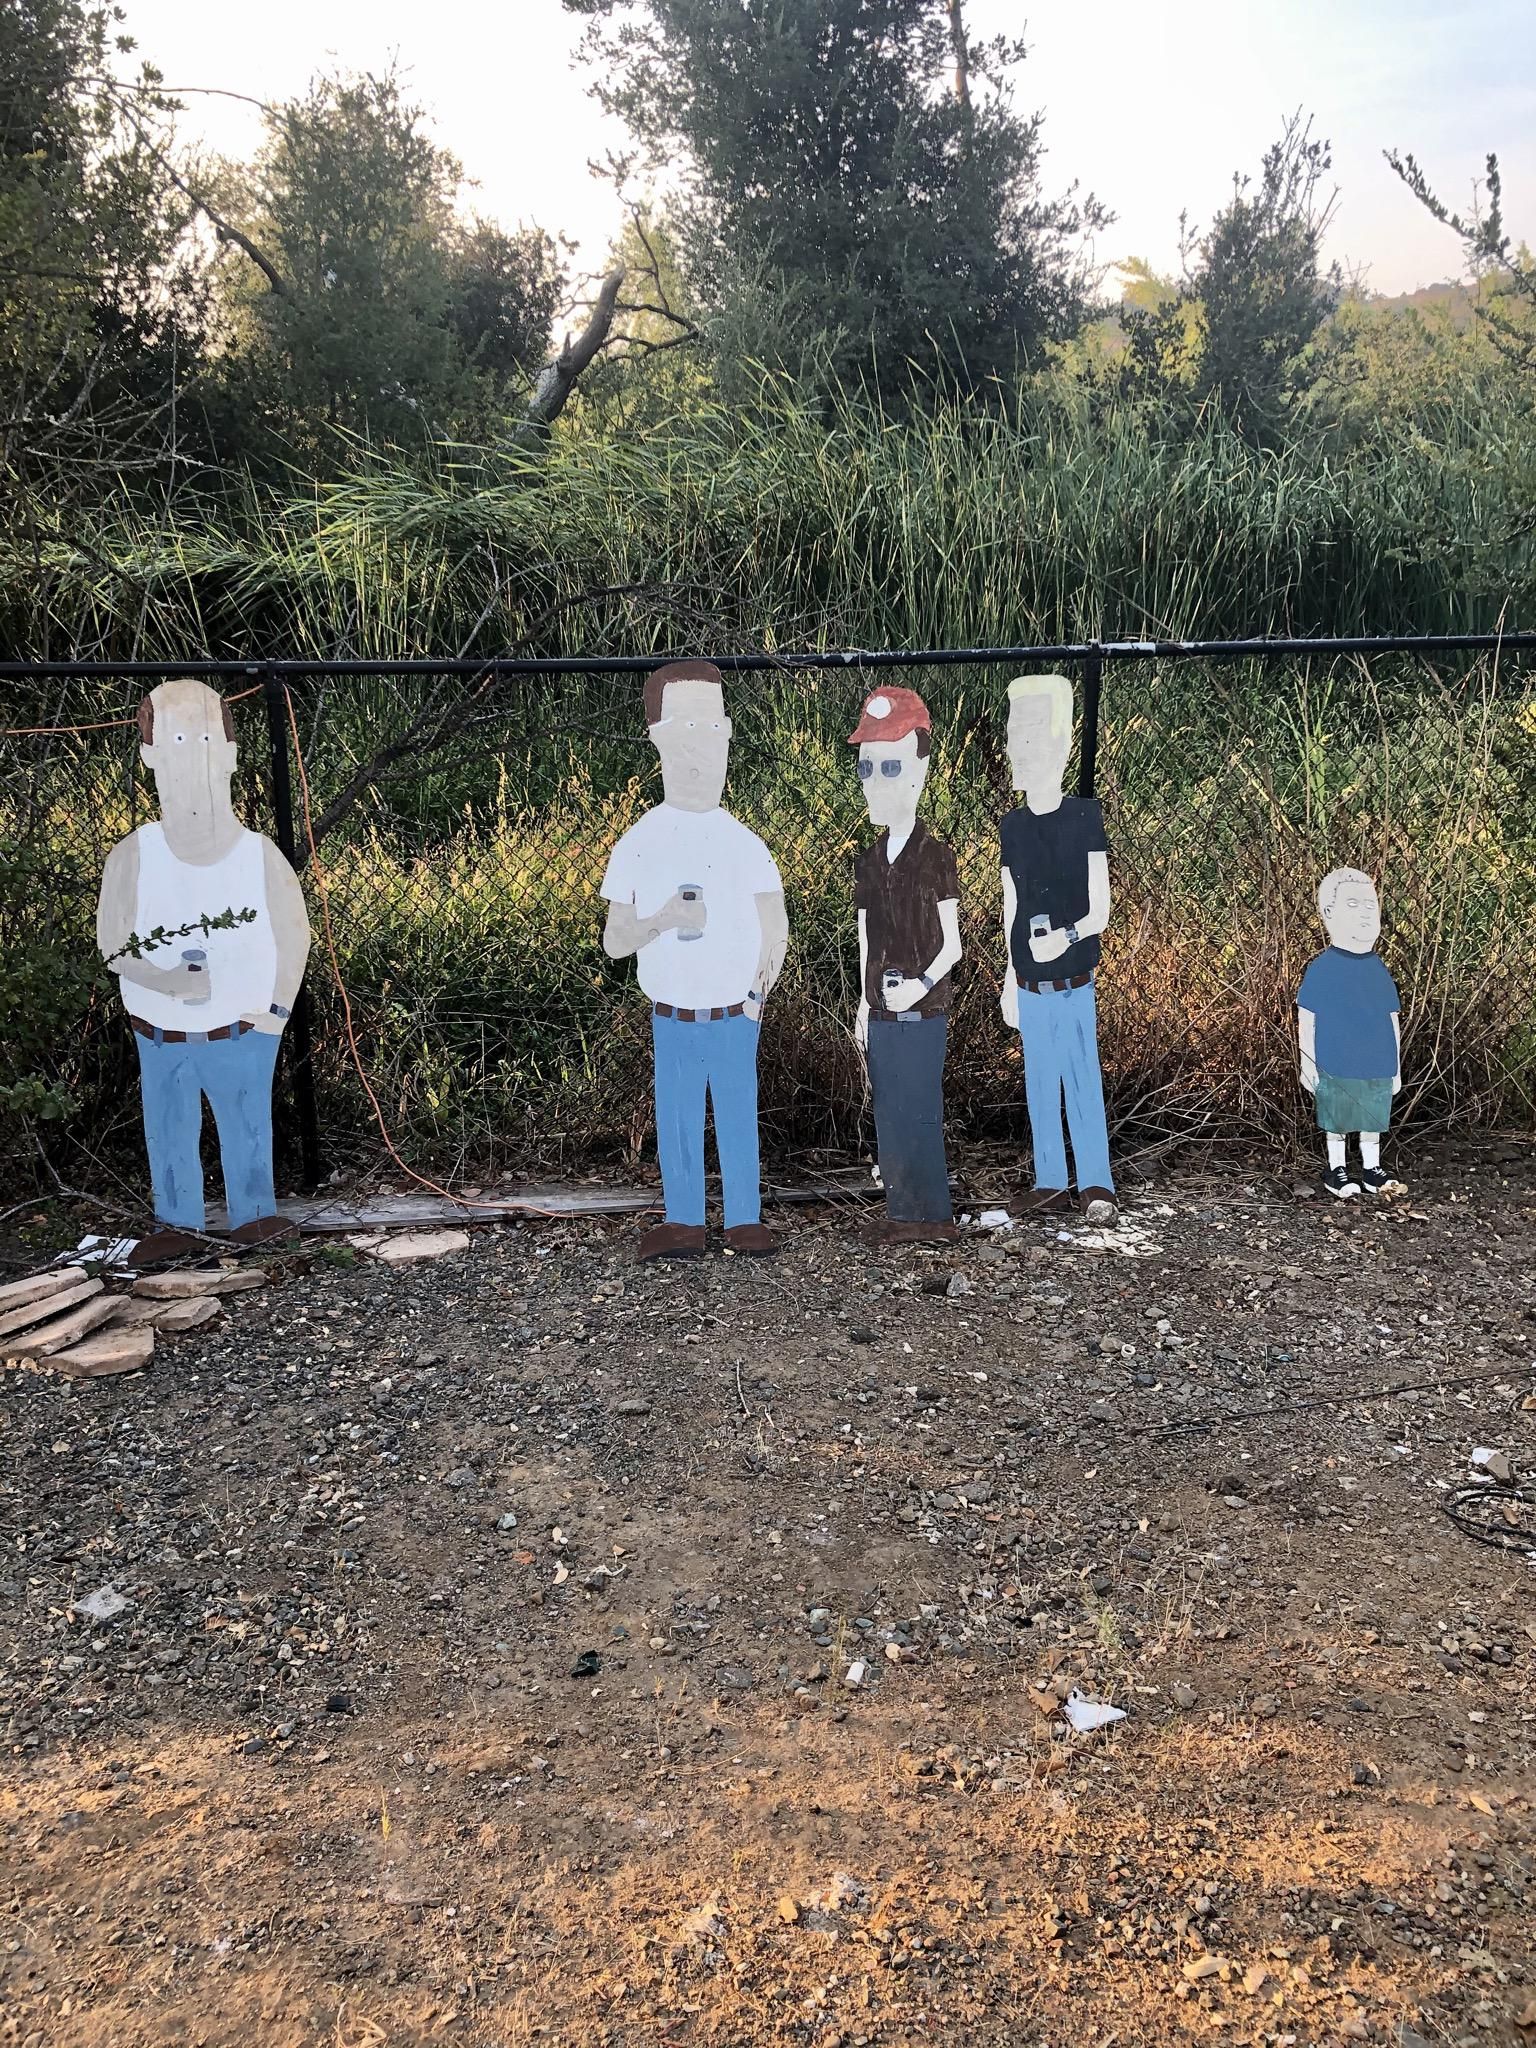 My dad is a huge King of the Hill fan. He made these and keeps them in his backyard.